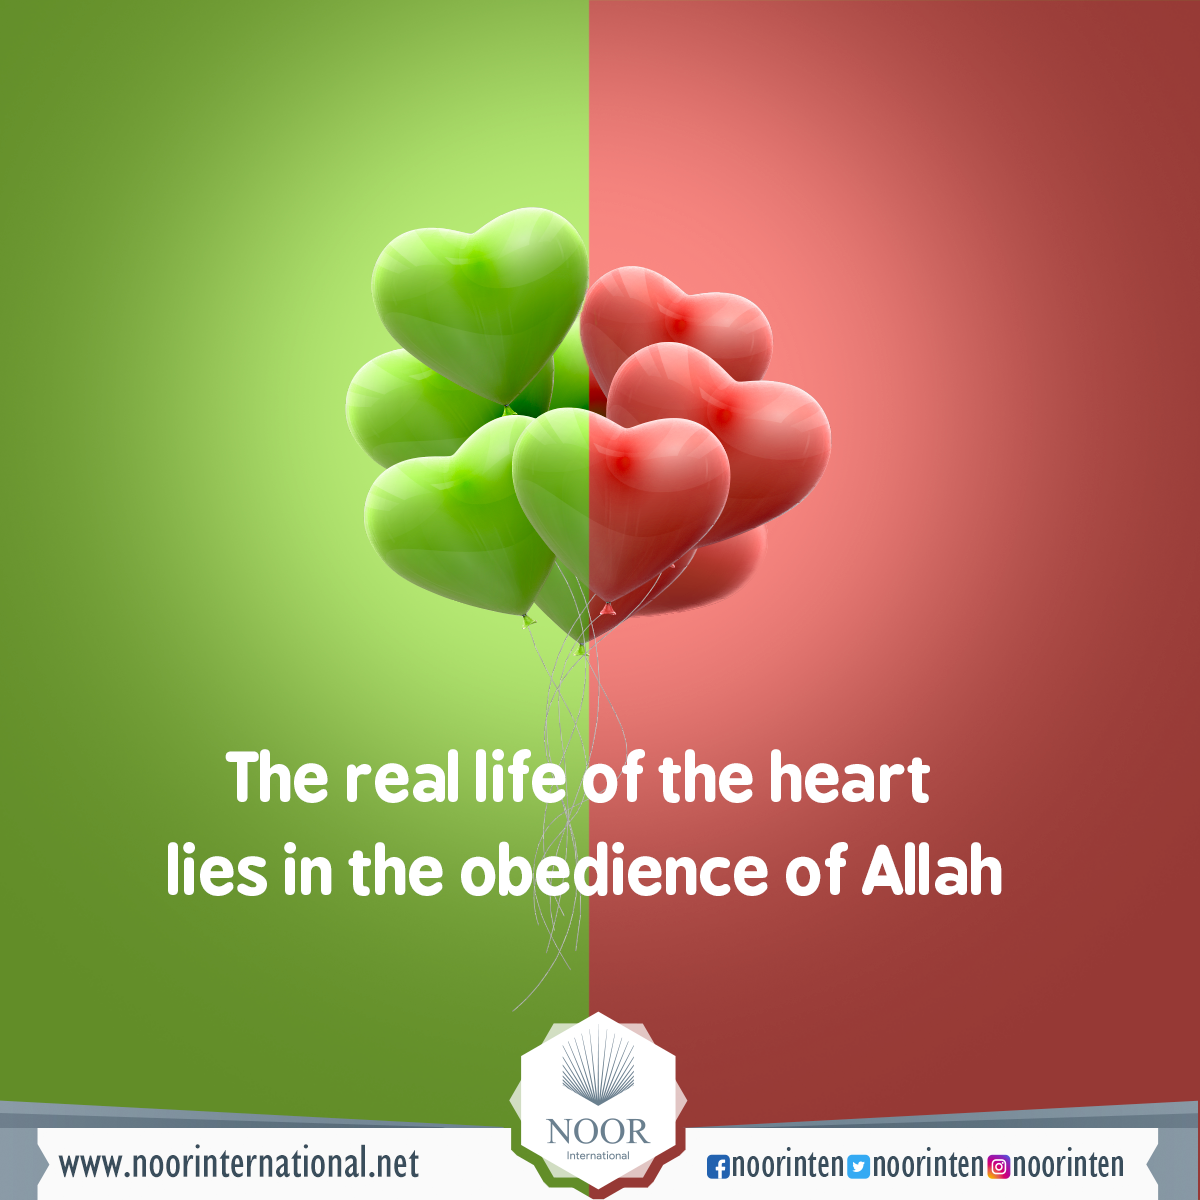 The real life of the heart lies in the obedience of Allah